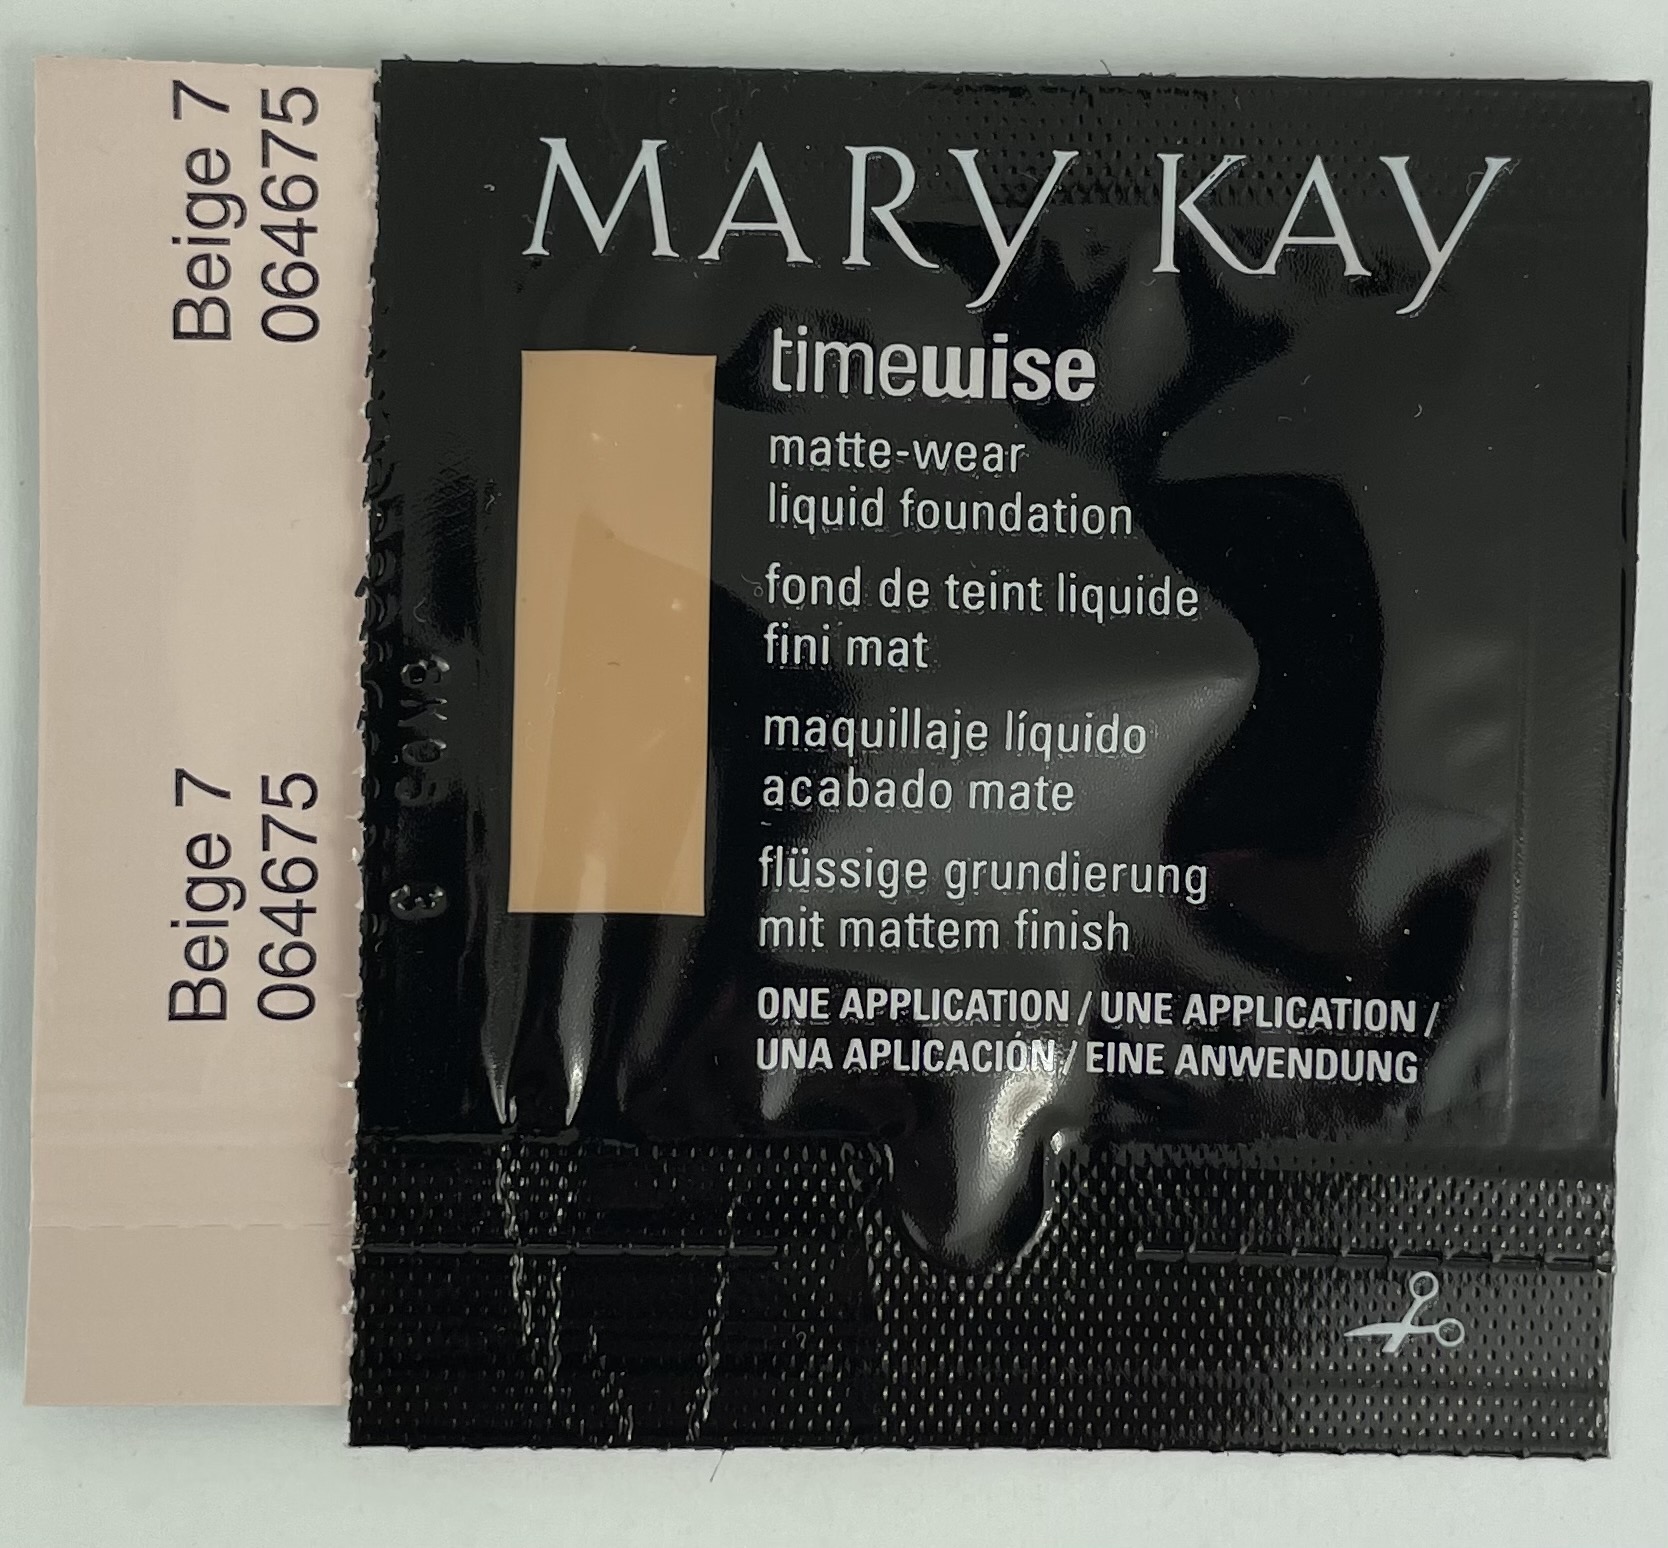 Pidgin Karakter temperatur Samples :: Mary Kay Beige 7 Matte Timewise Foundation ~ Sample (Discontinued)  - Discount Mary Kay Cosmetics